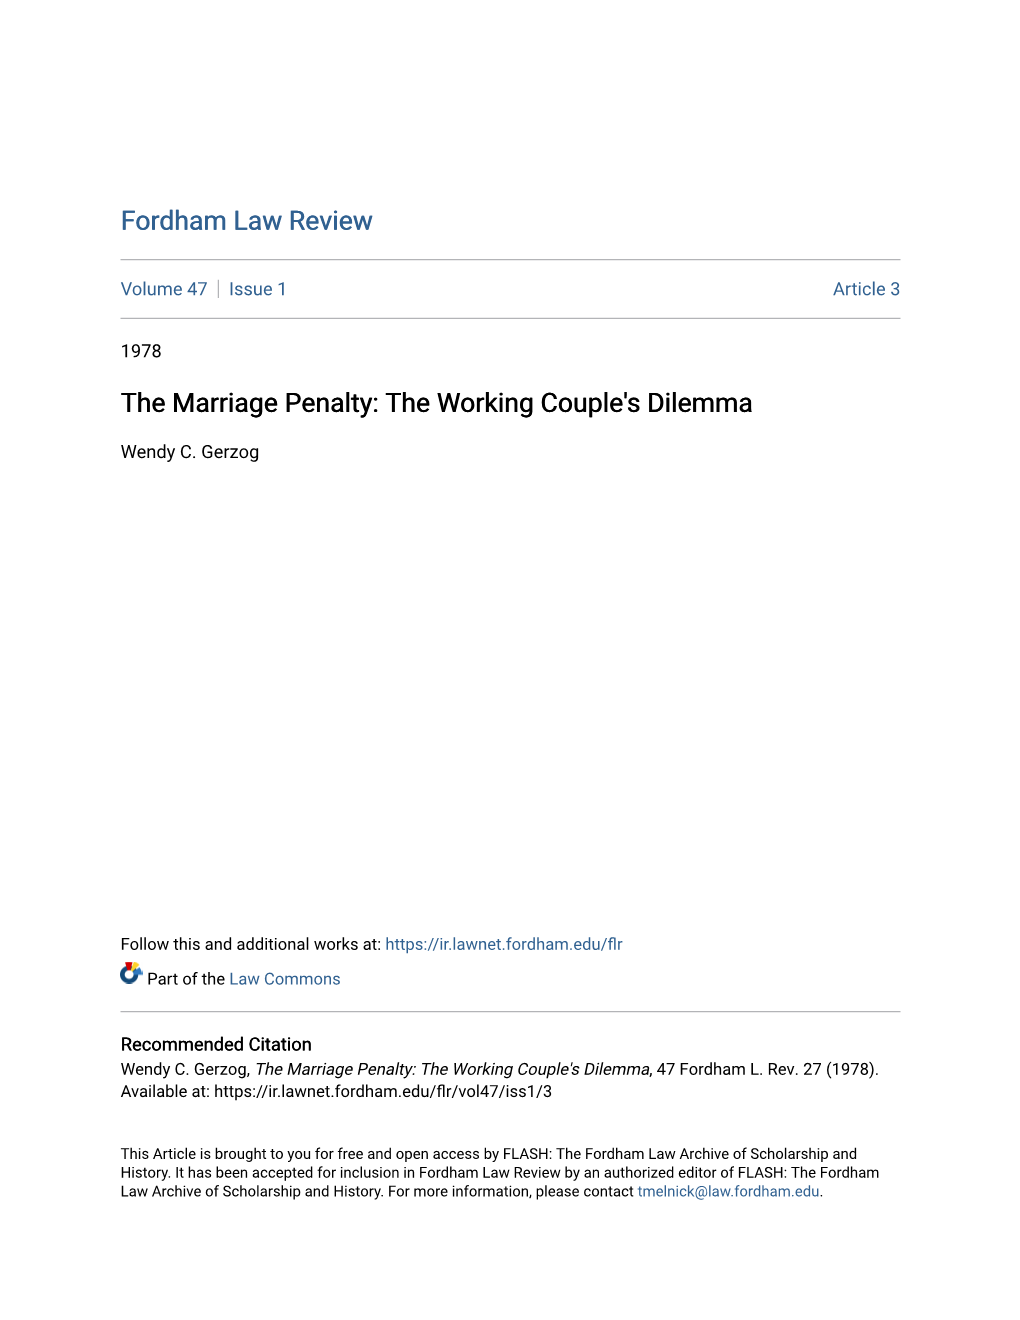 The Marriage Penalty: the Working Couple's Dilemma